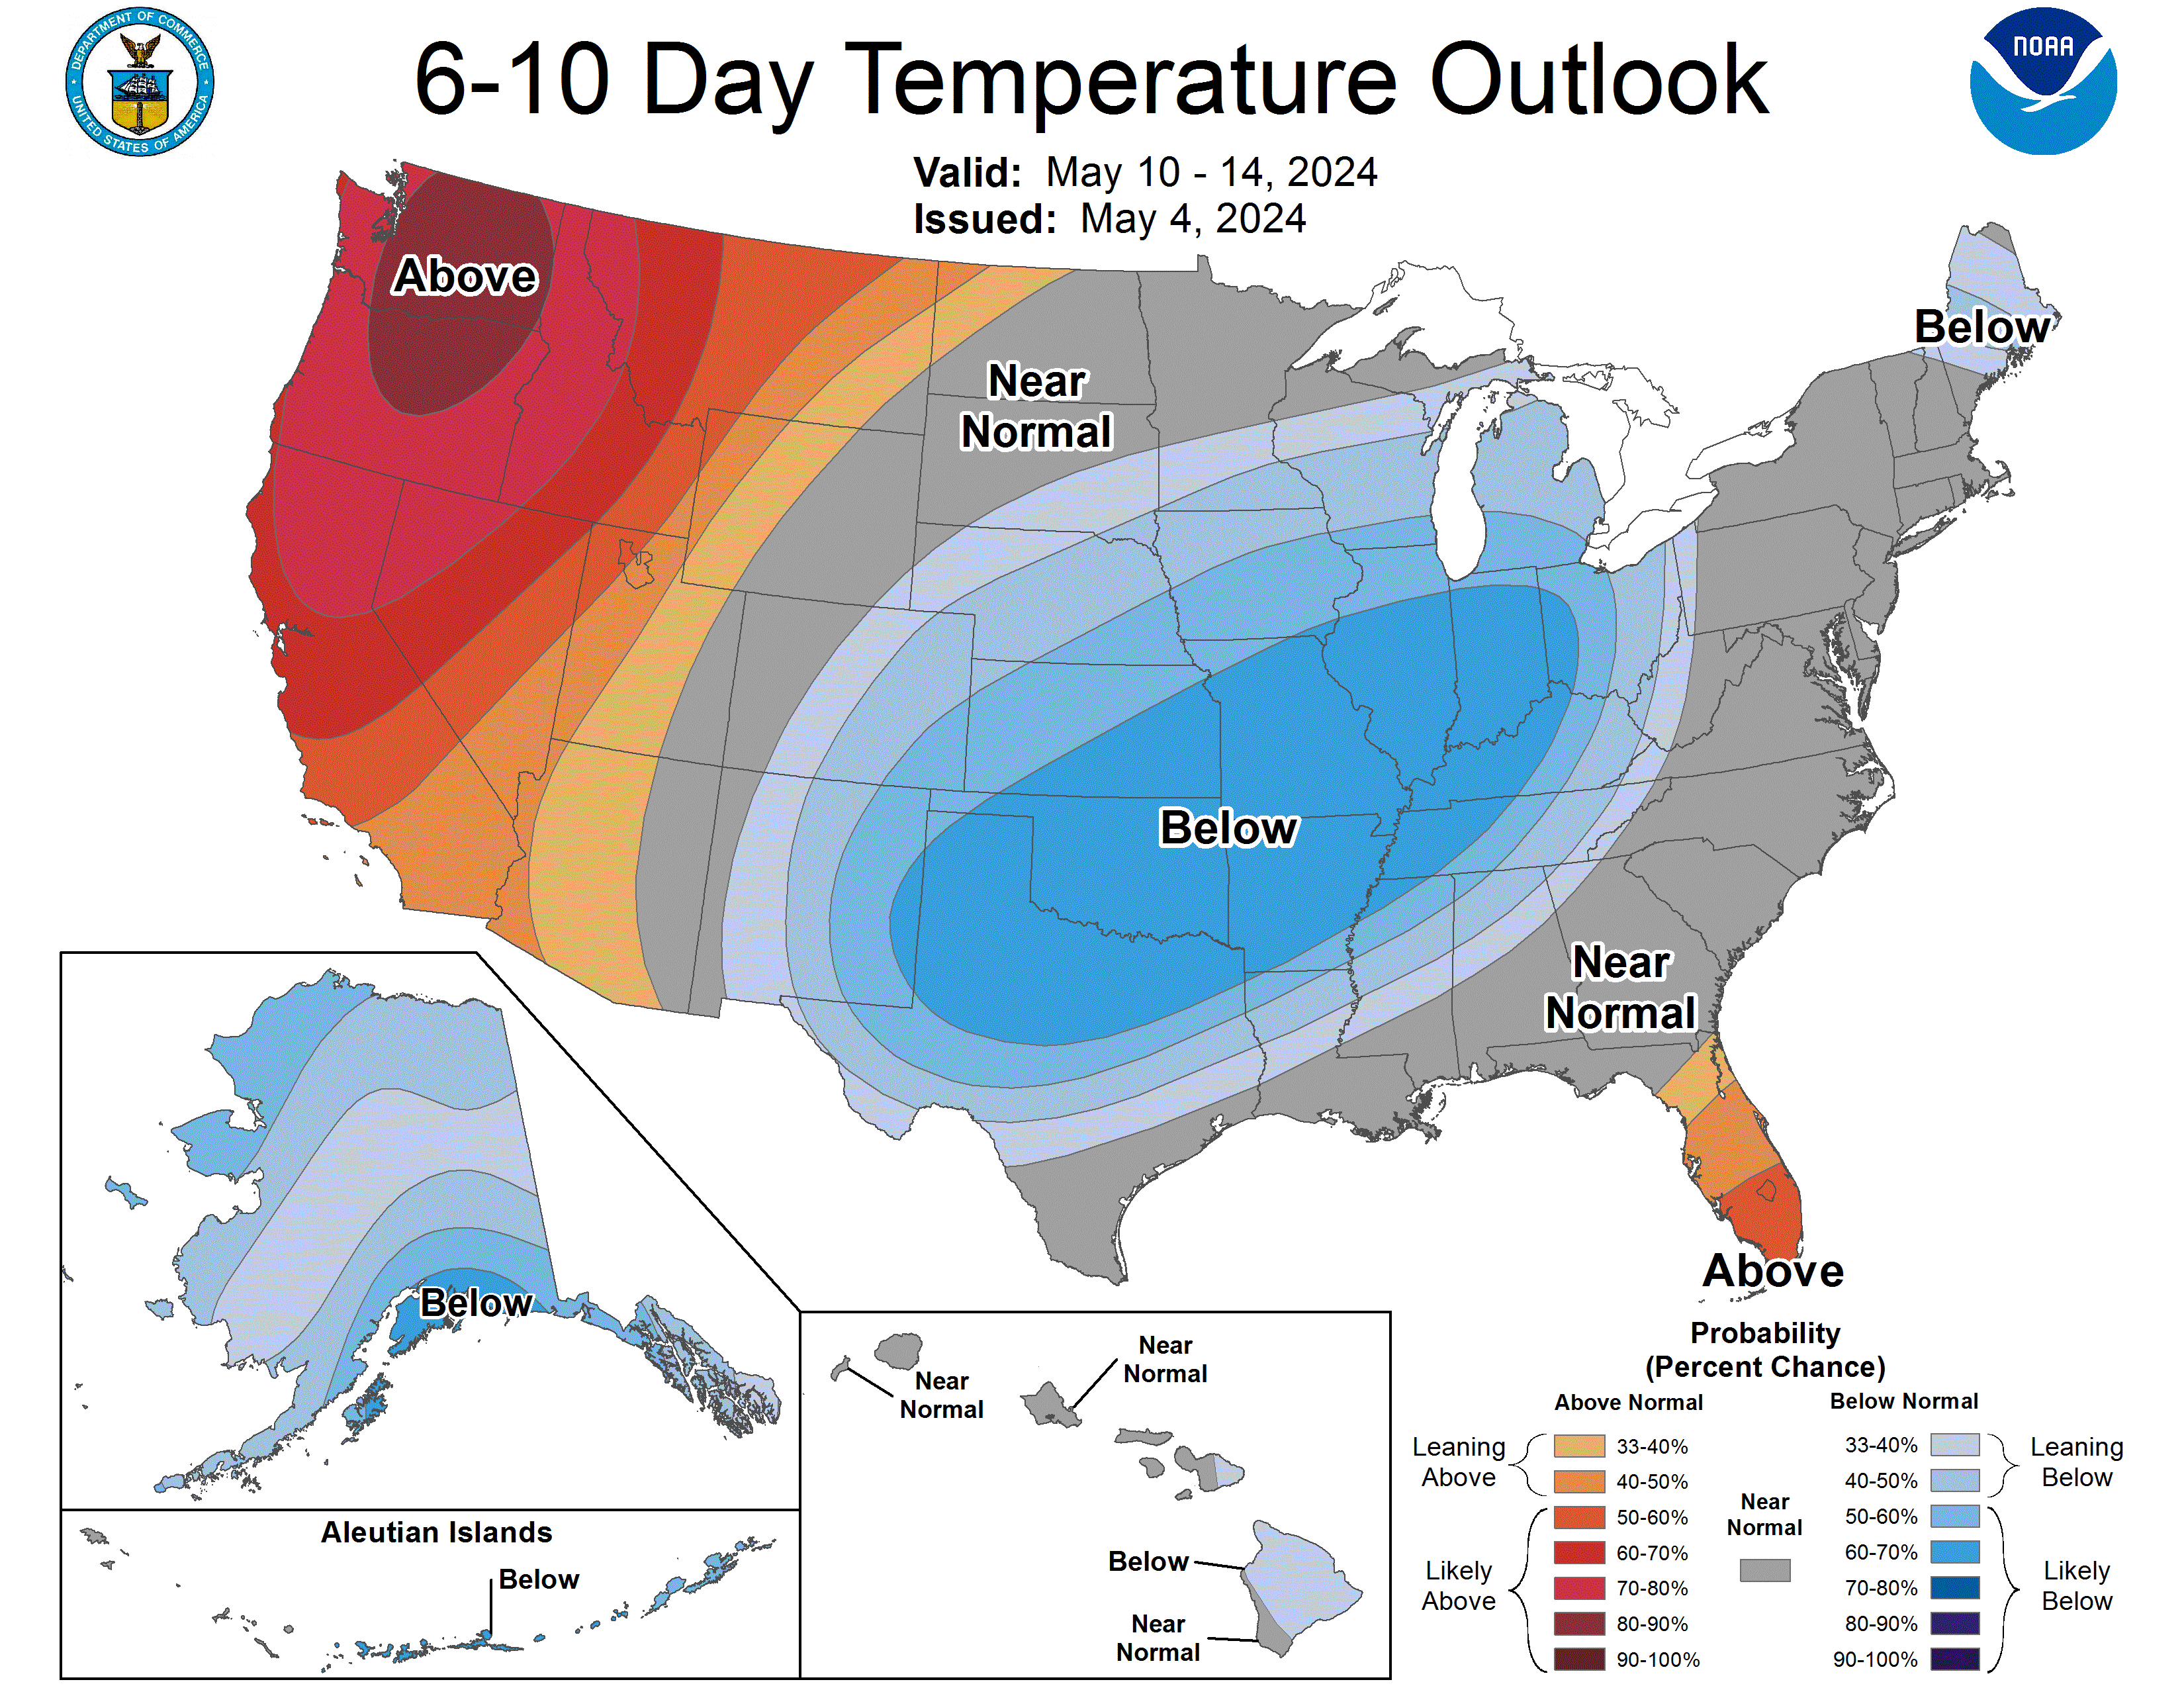 6-10 Day Temp Outlook